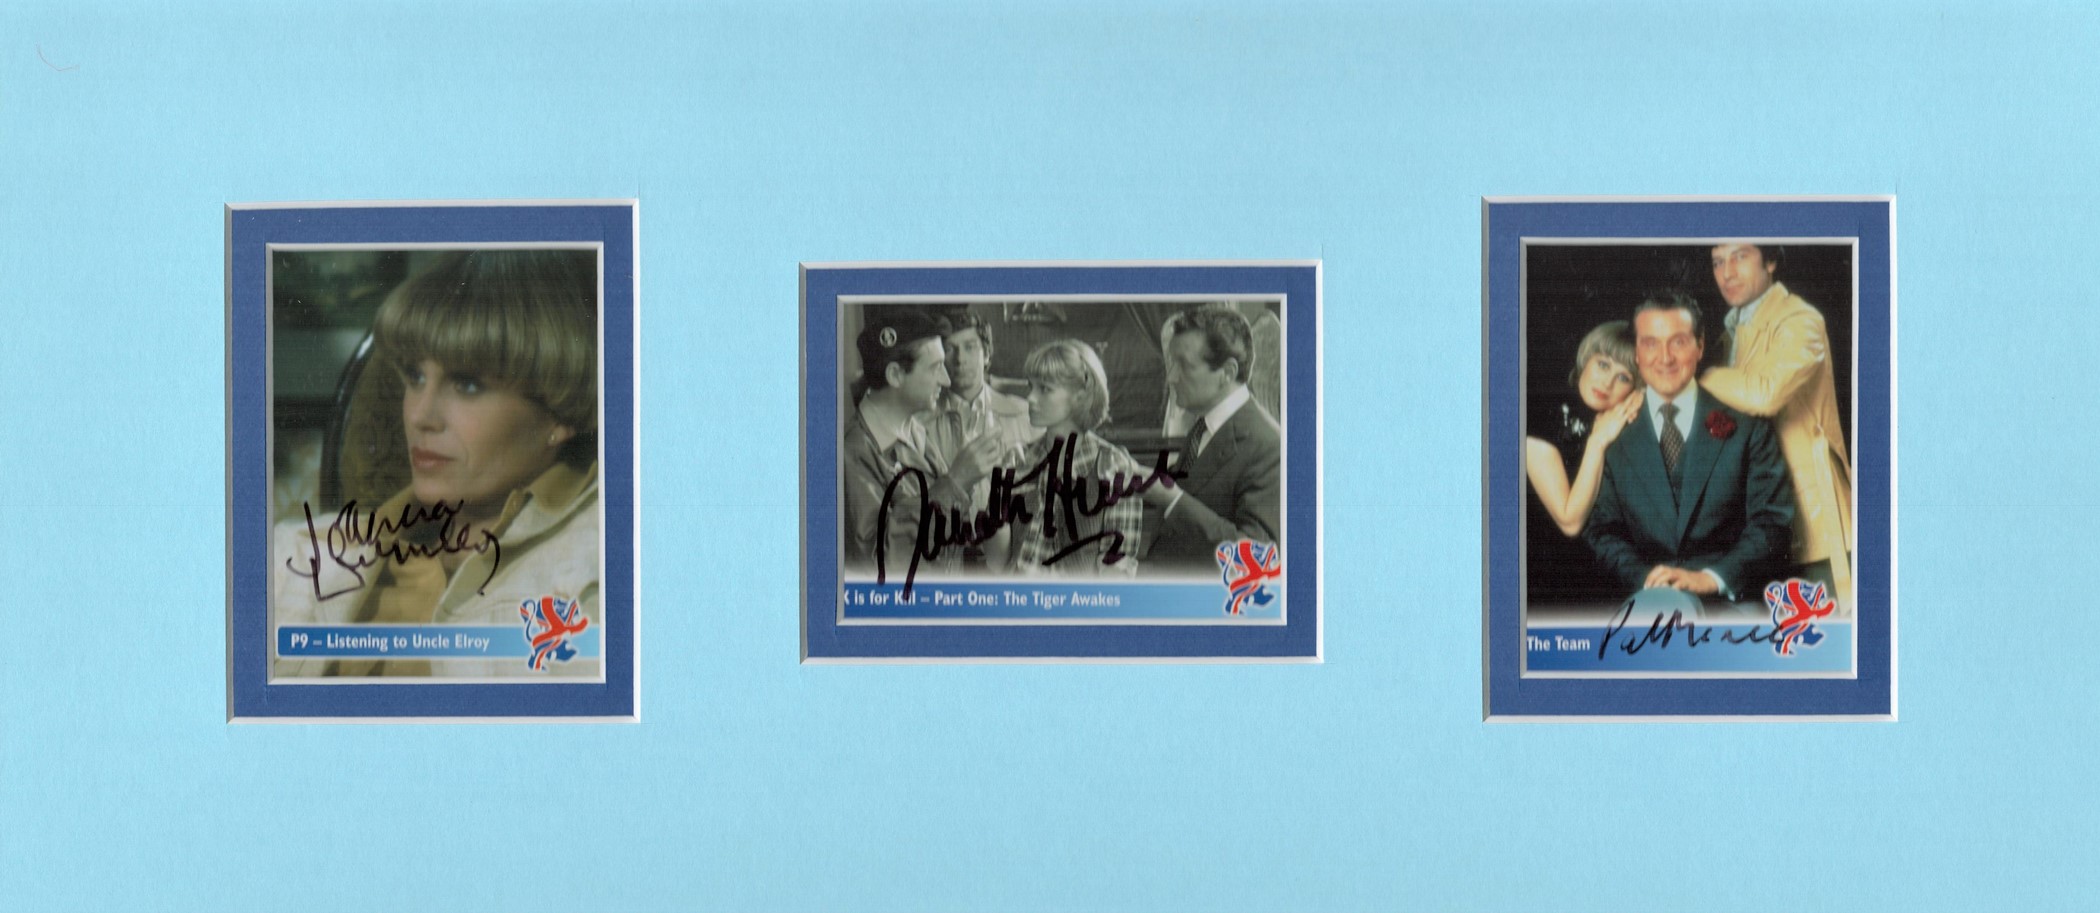 THE NEW AVENGERS 7x16 Mounted Trading Cards signed by Joanna Lumley, Gareth Hunt, 1942-2007, and